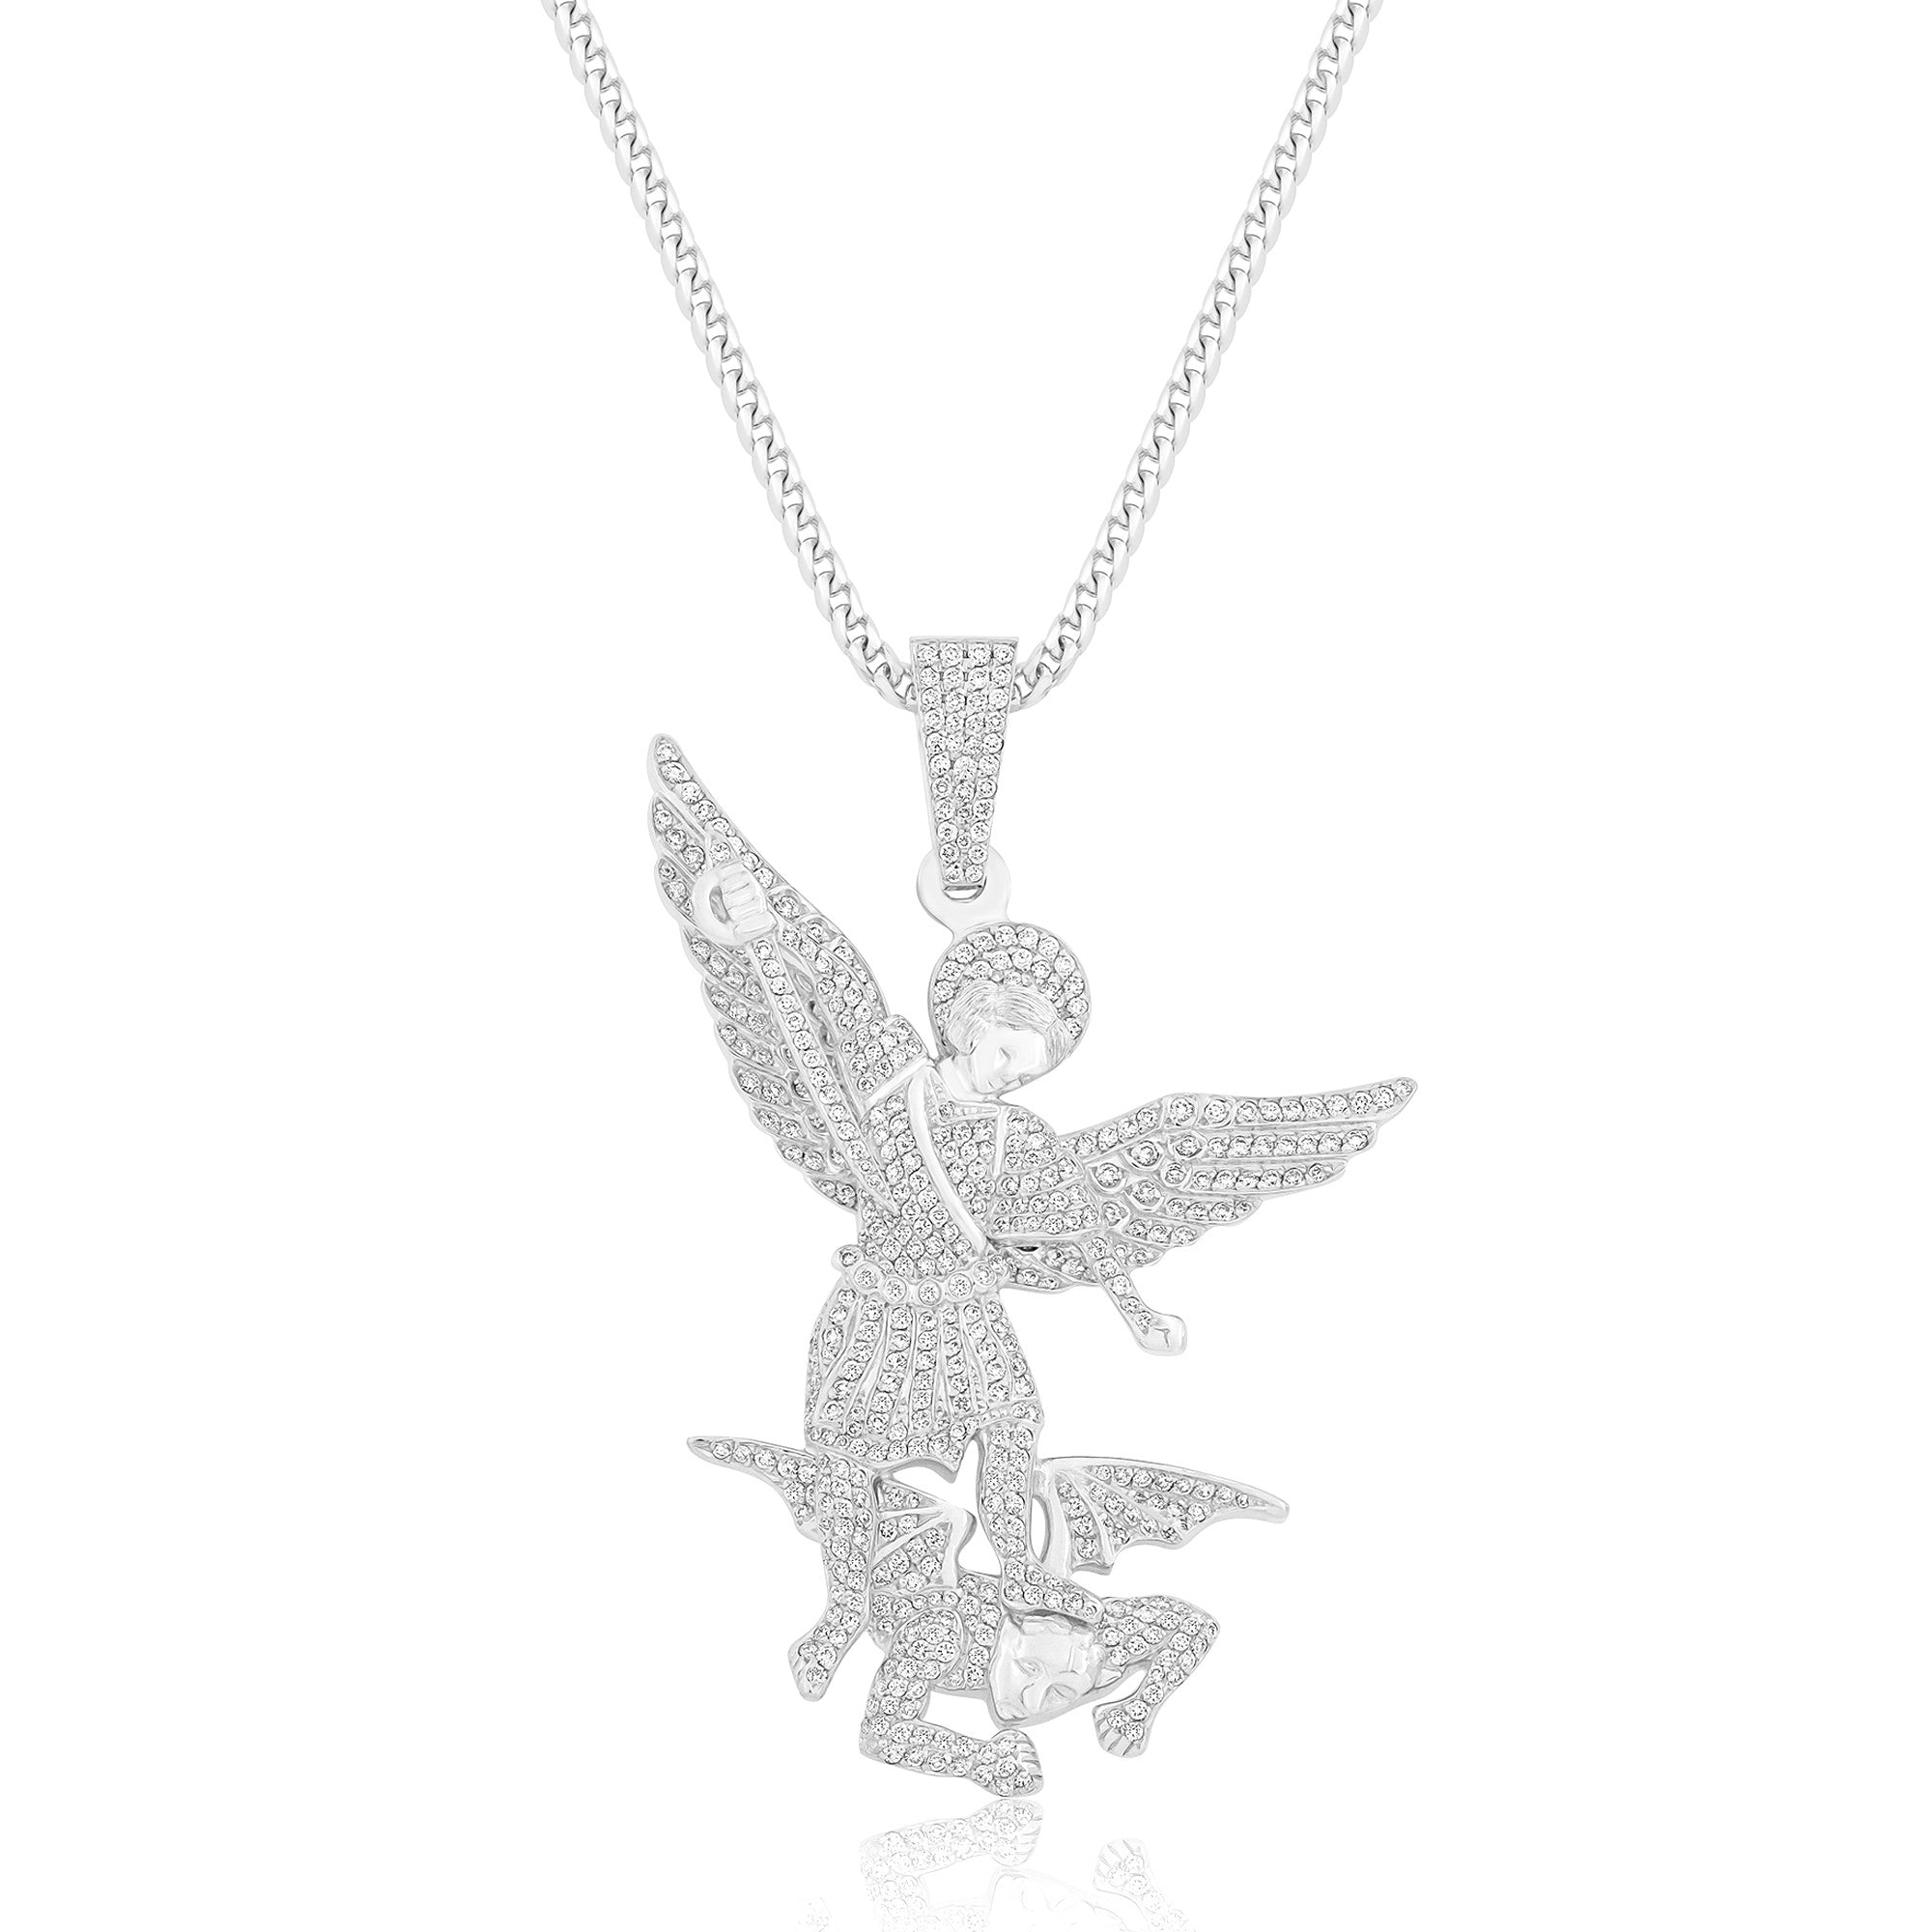 Baby Saint Michael Arch Angel Piece (Fully Iced) (14K WHITE GOLD) - IF & Co. Custom Jewelers